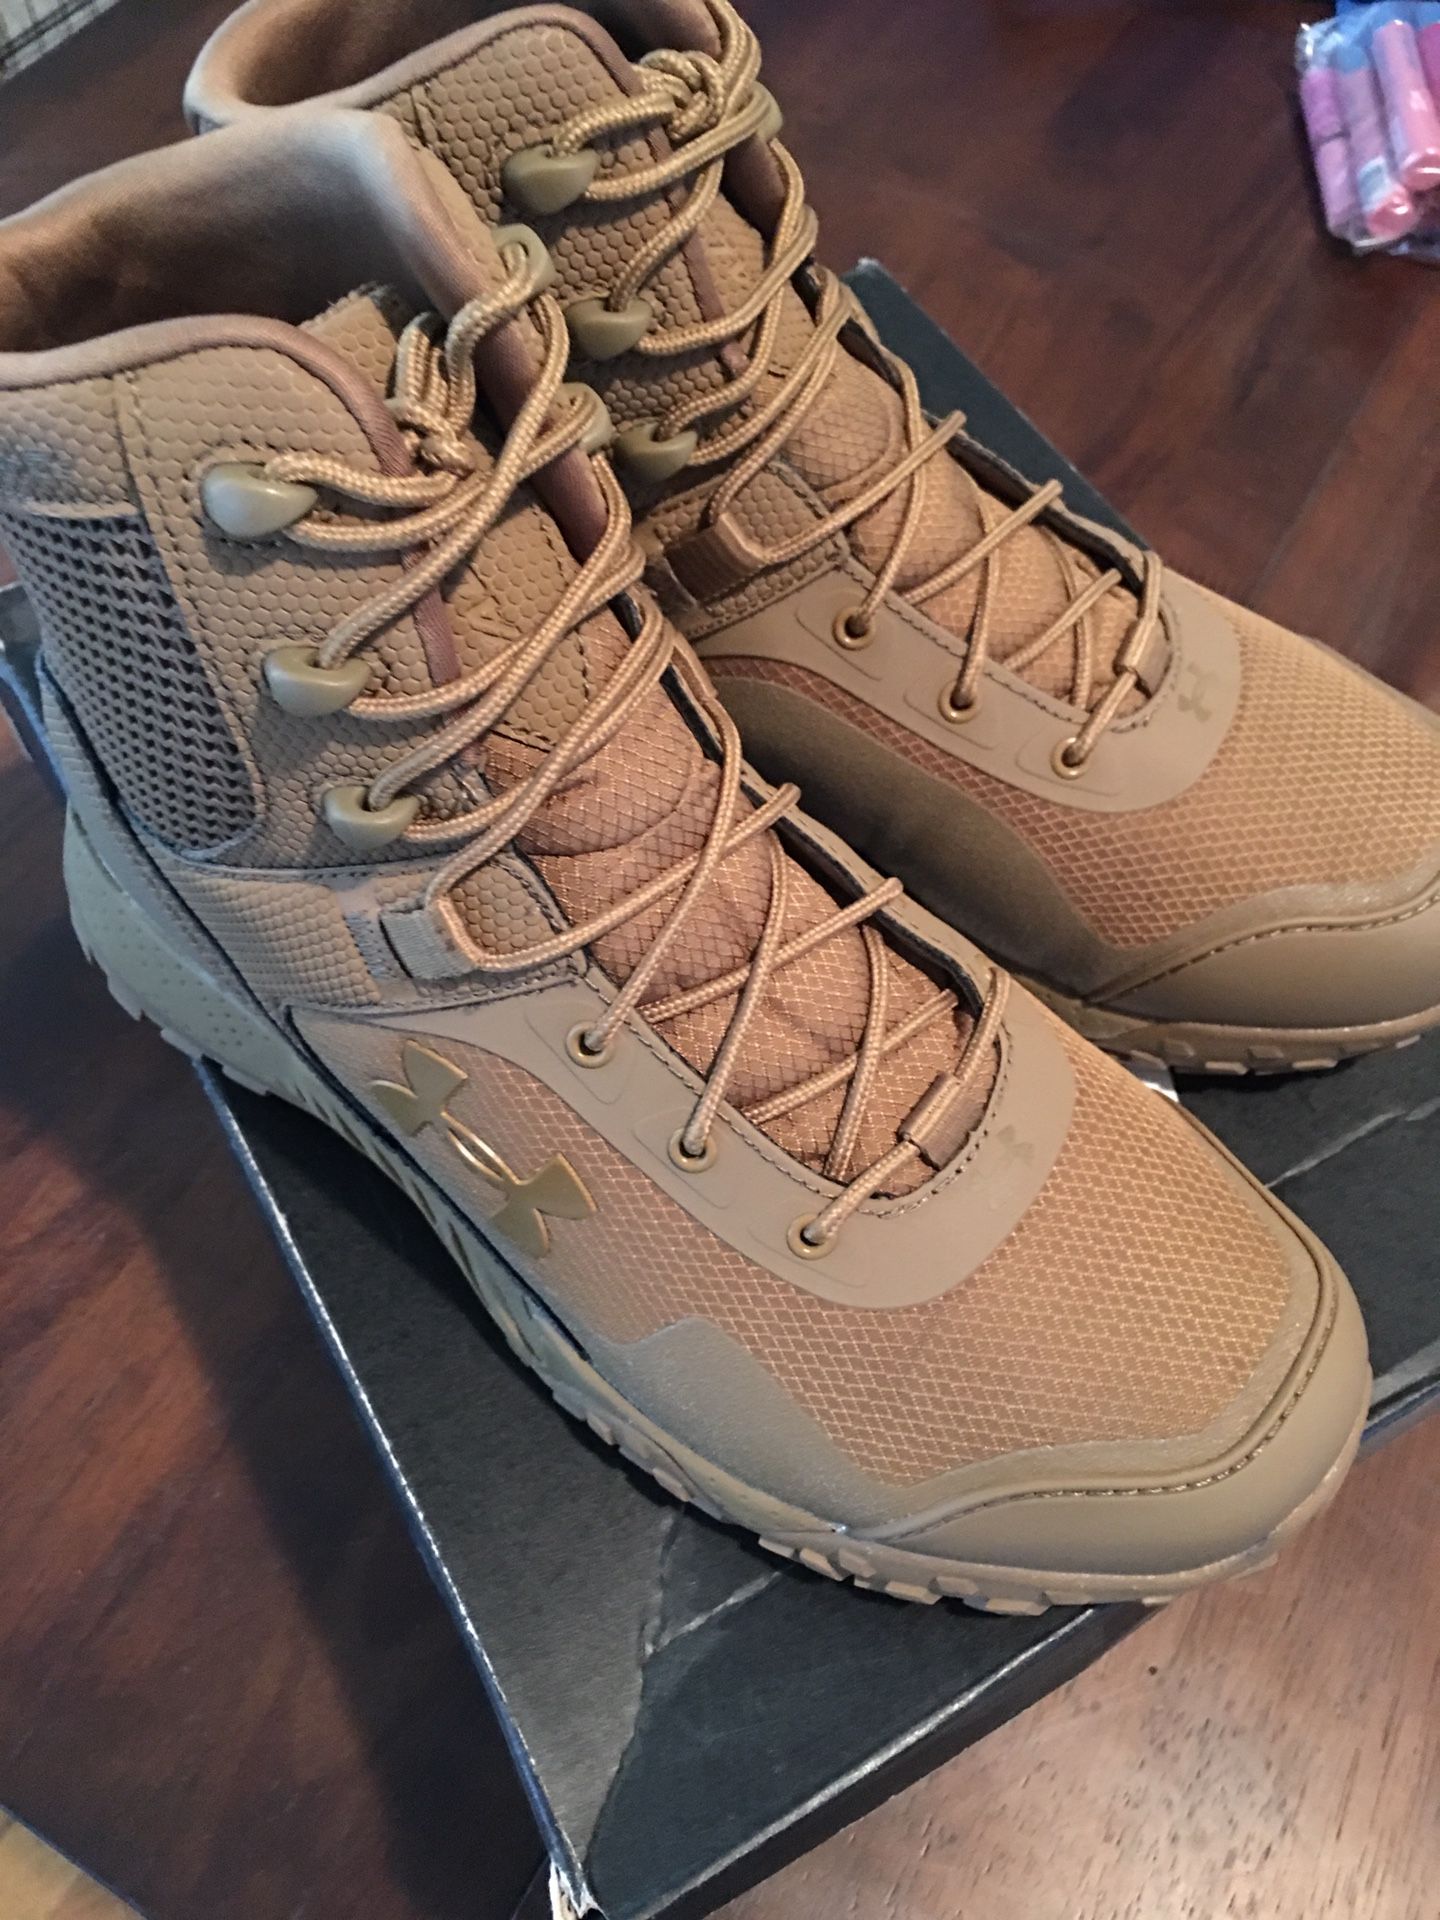 New Women’s Under Armour Work Boots 8.5